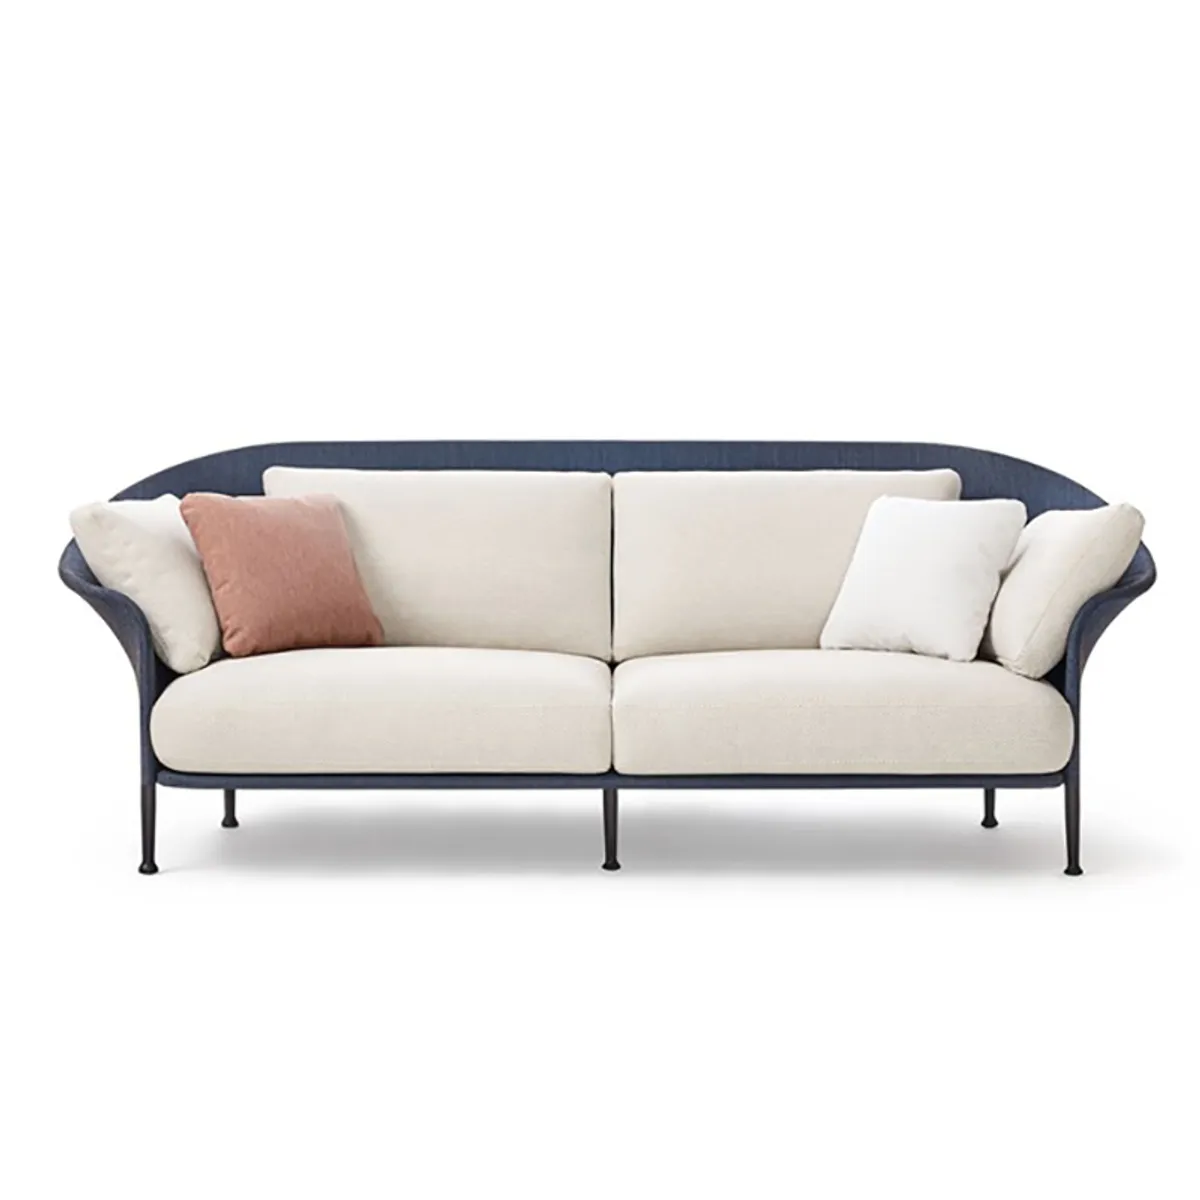 Liz Sofa With Blue And White Upholstery